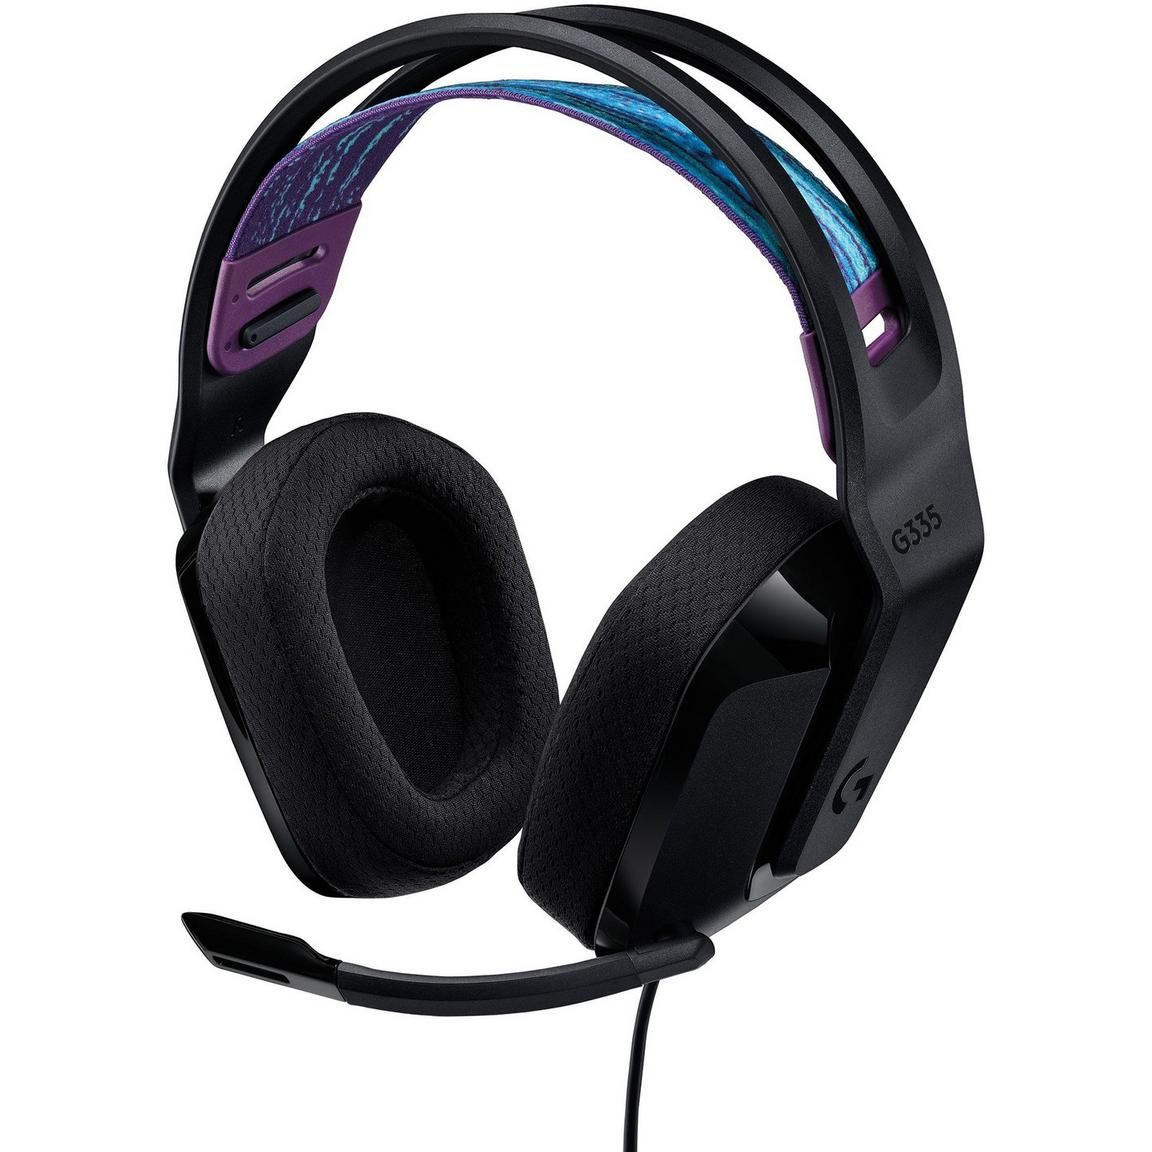 A picture of a Logitech G335 Wired Gaming Headset